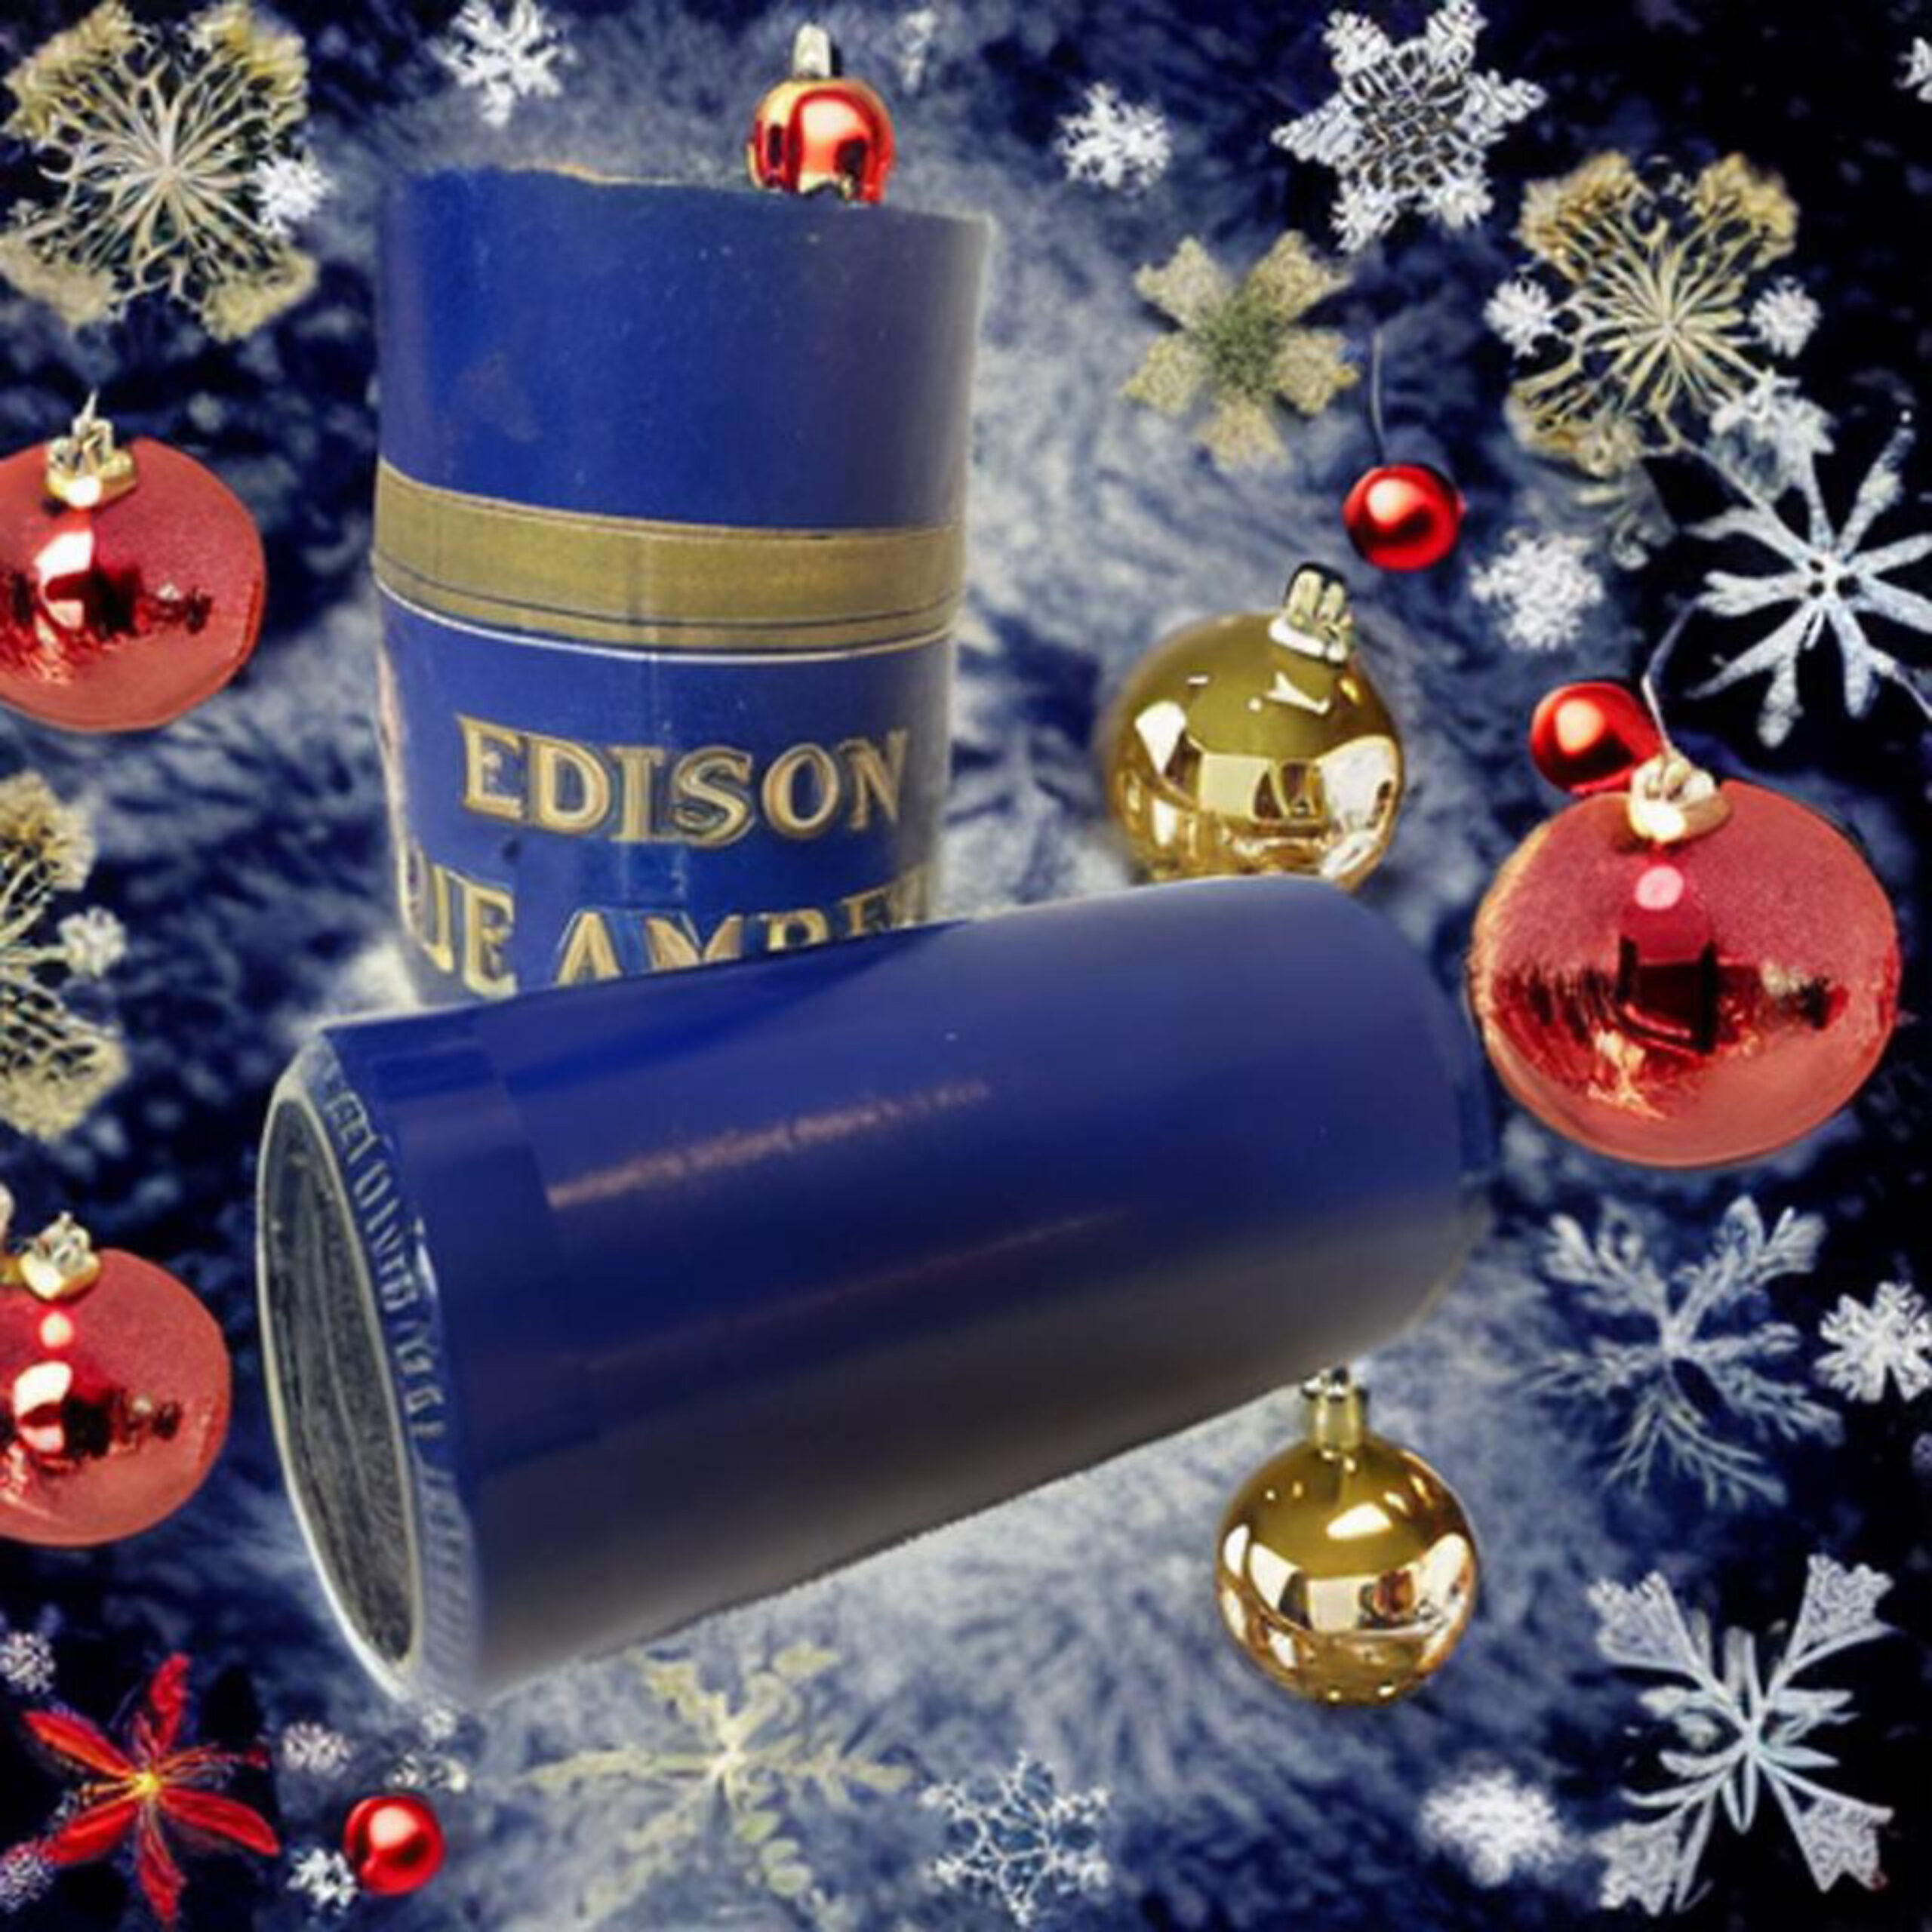 Edison 4 minute Cylinder…”Sleighride Party”